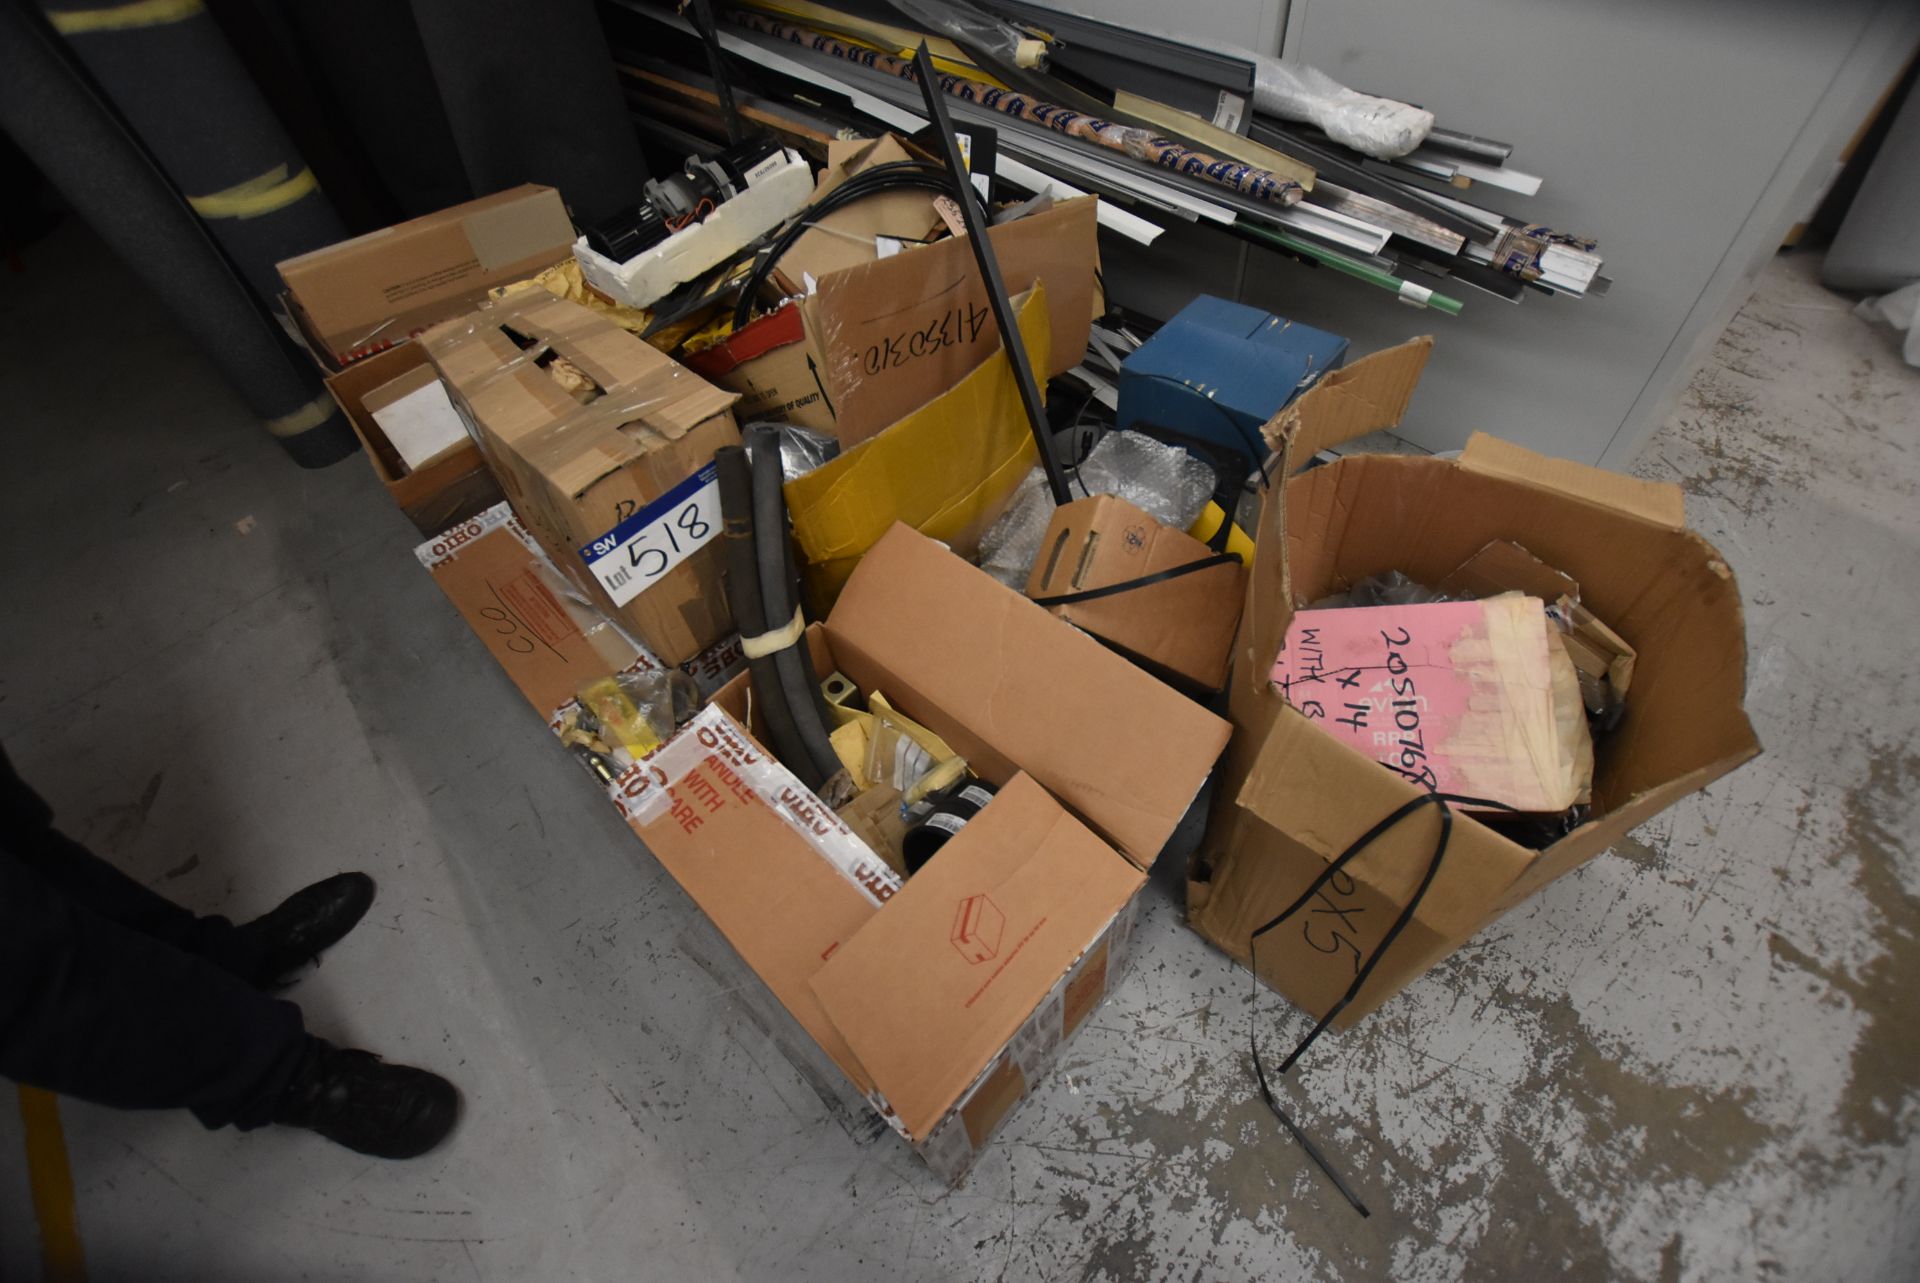 Components, as set out in cardboard boxes (underst